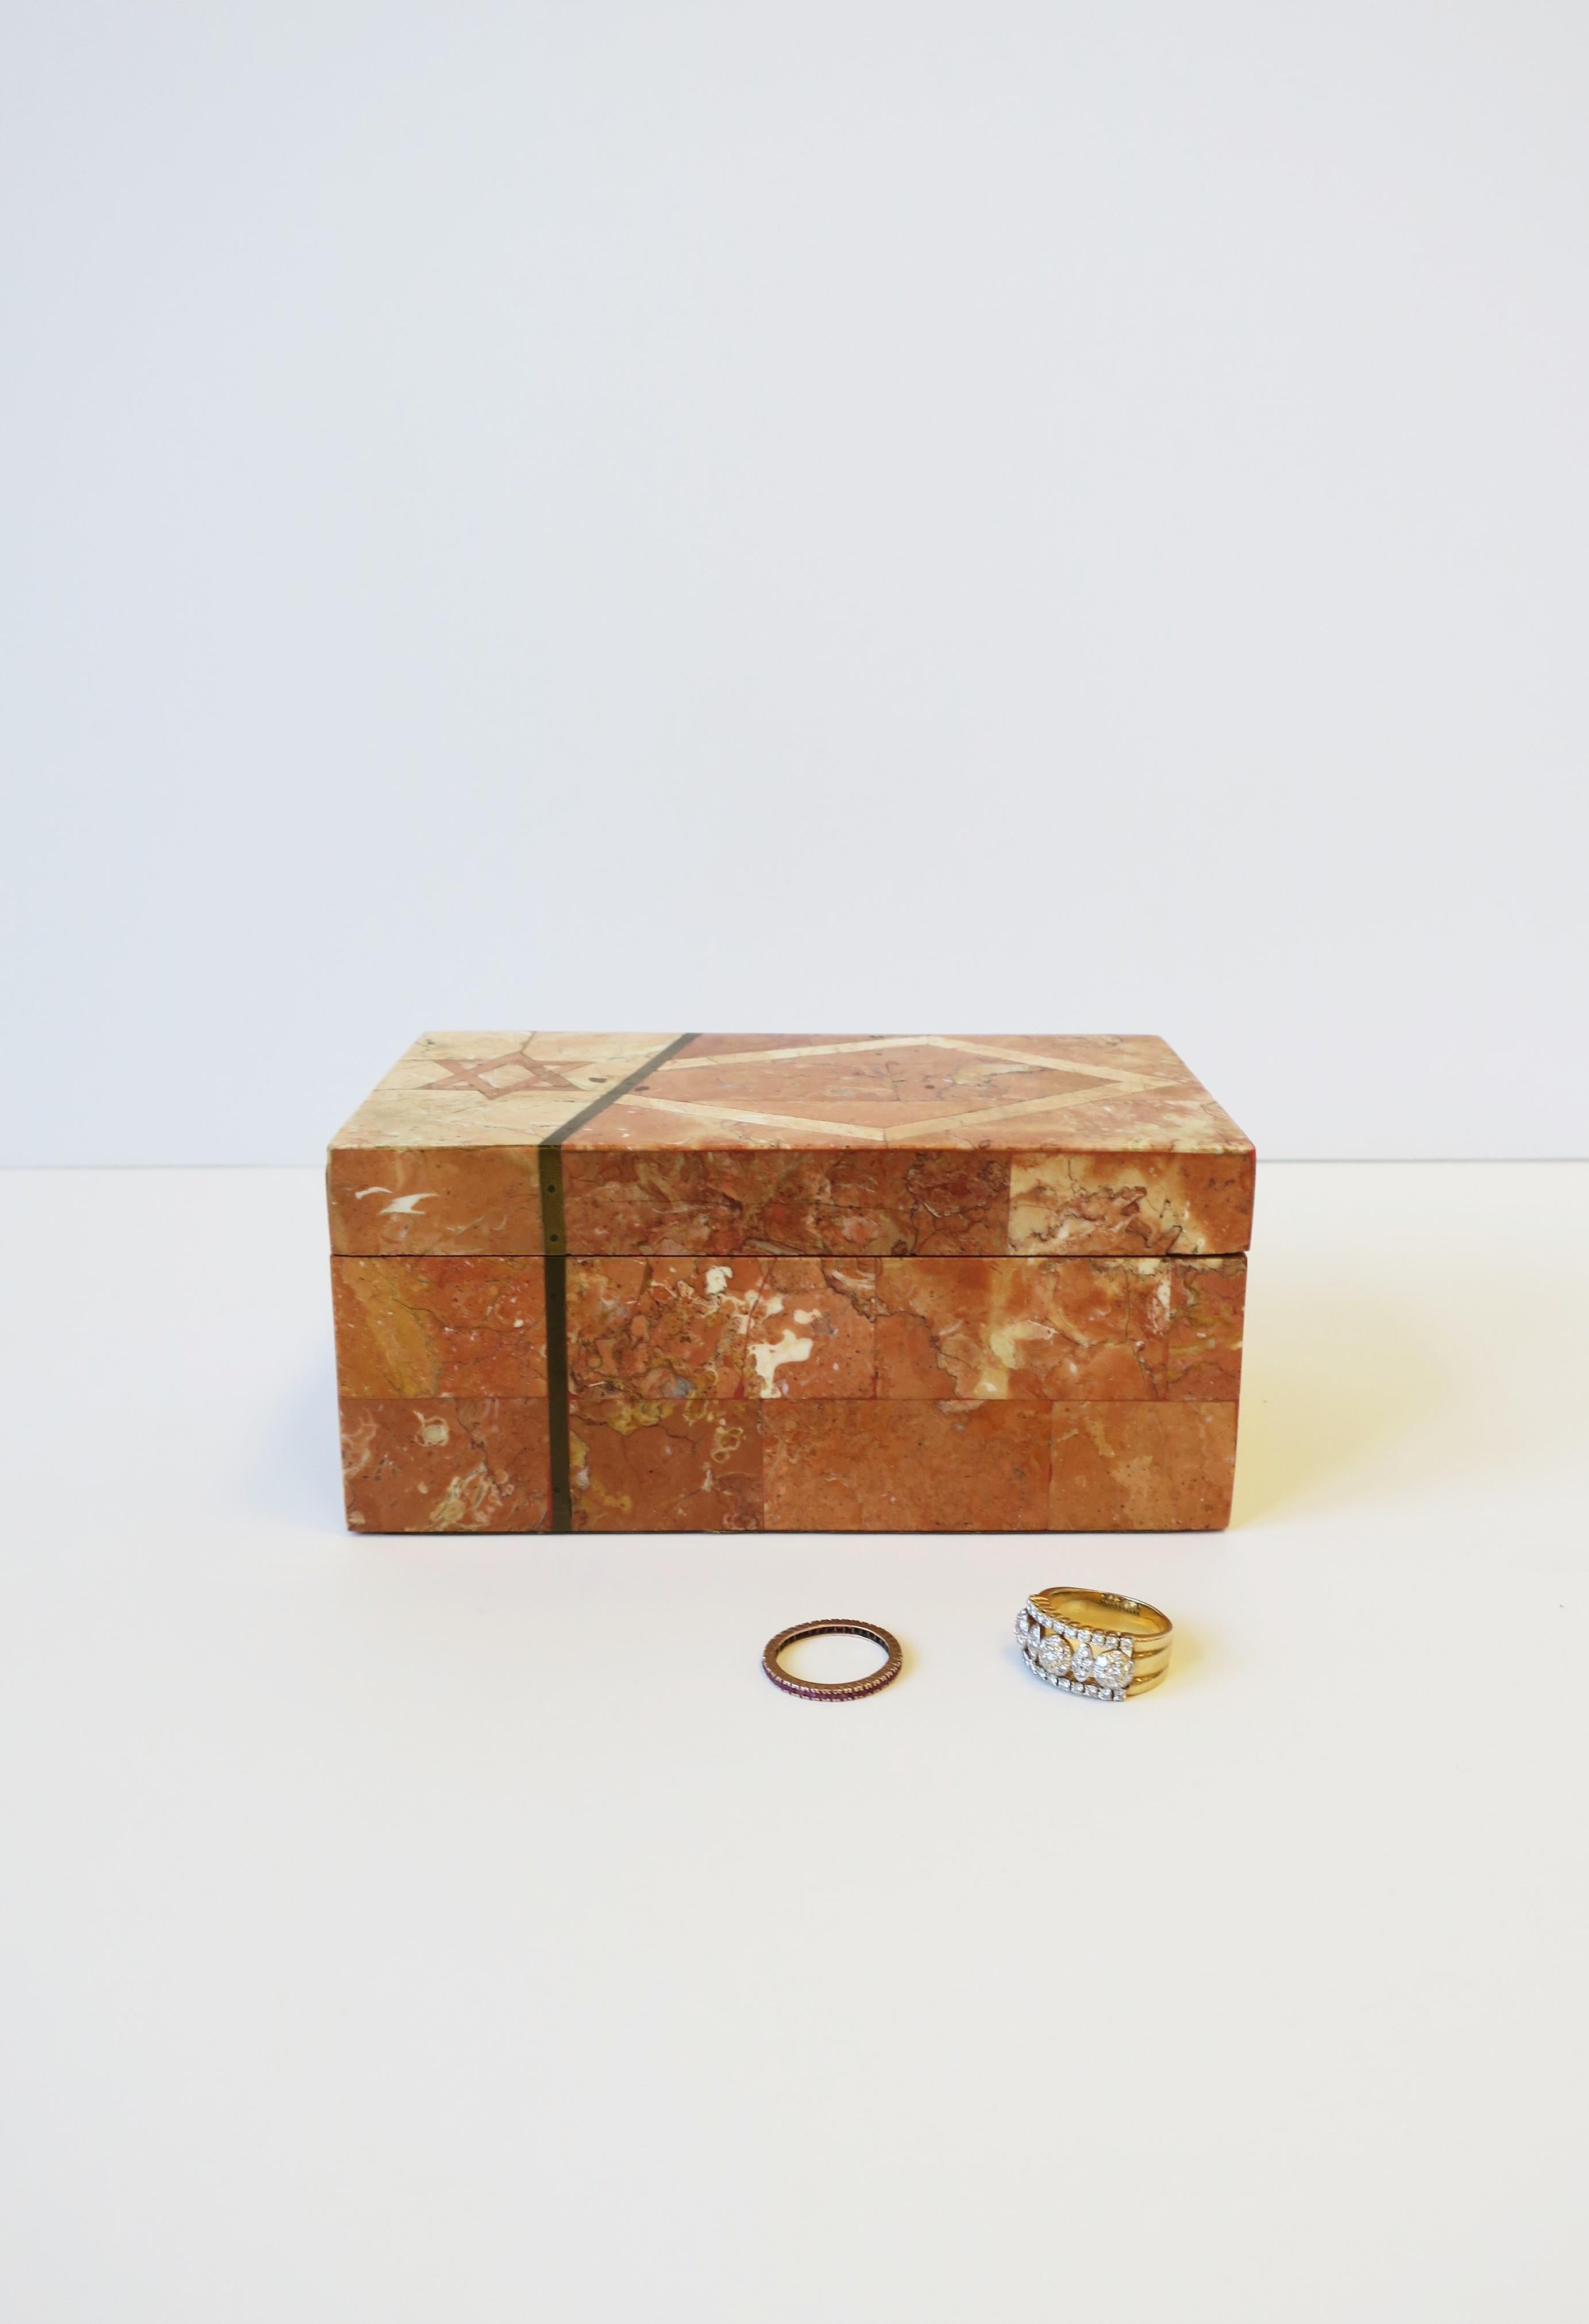 Stone Marble Box with Jewish Star of David Design For Sale